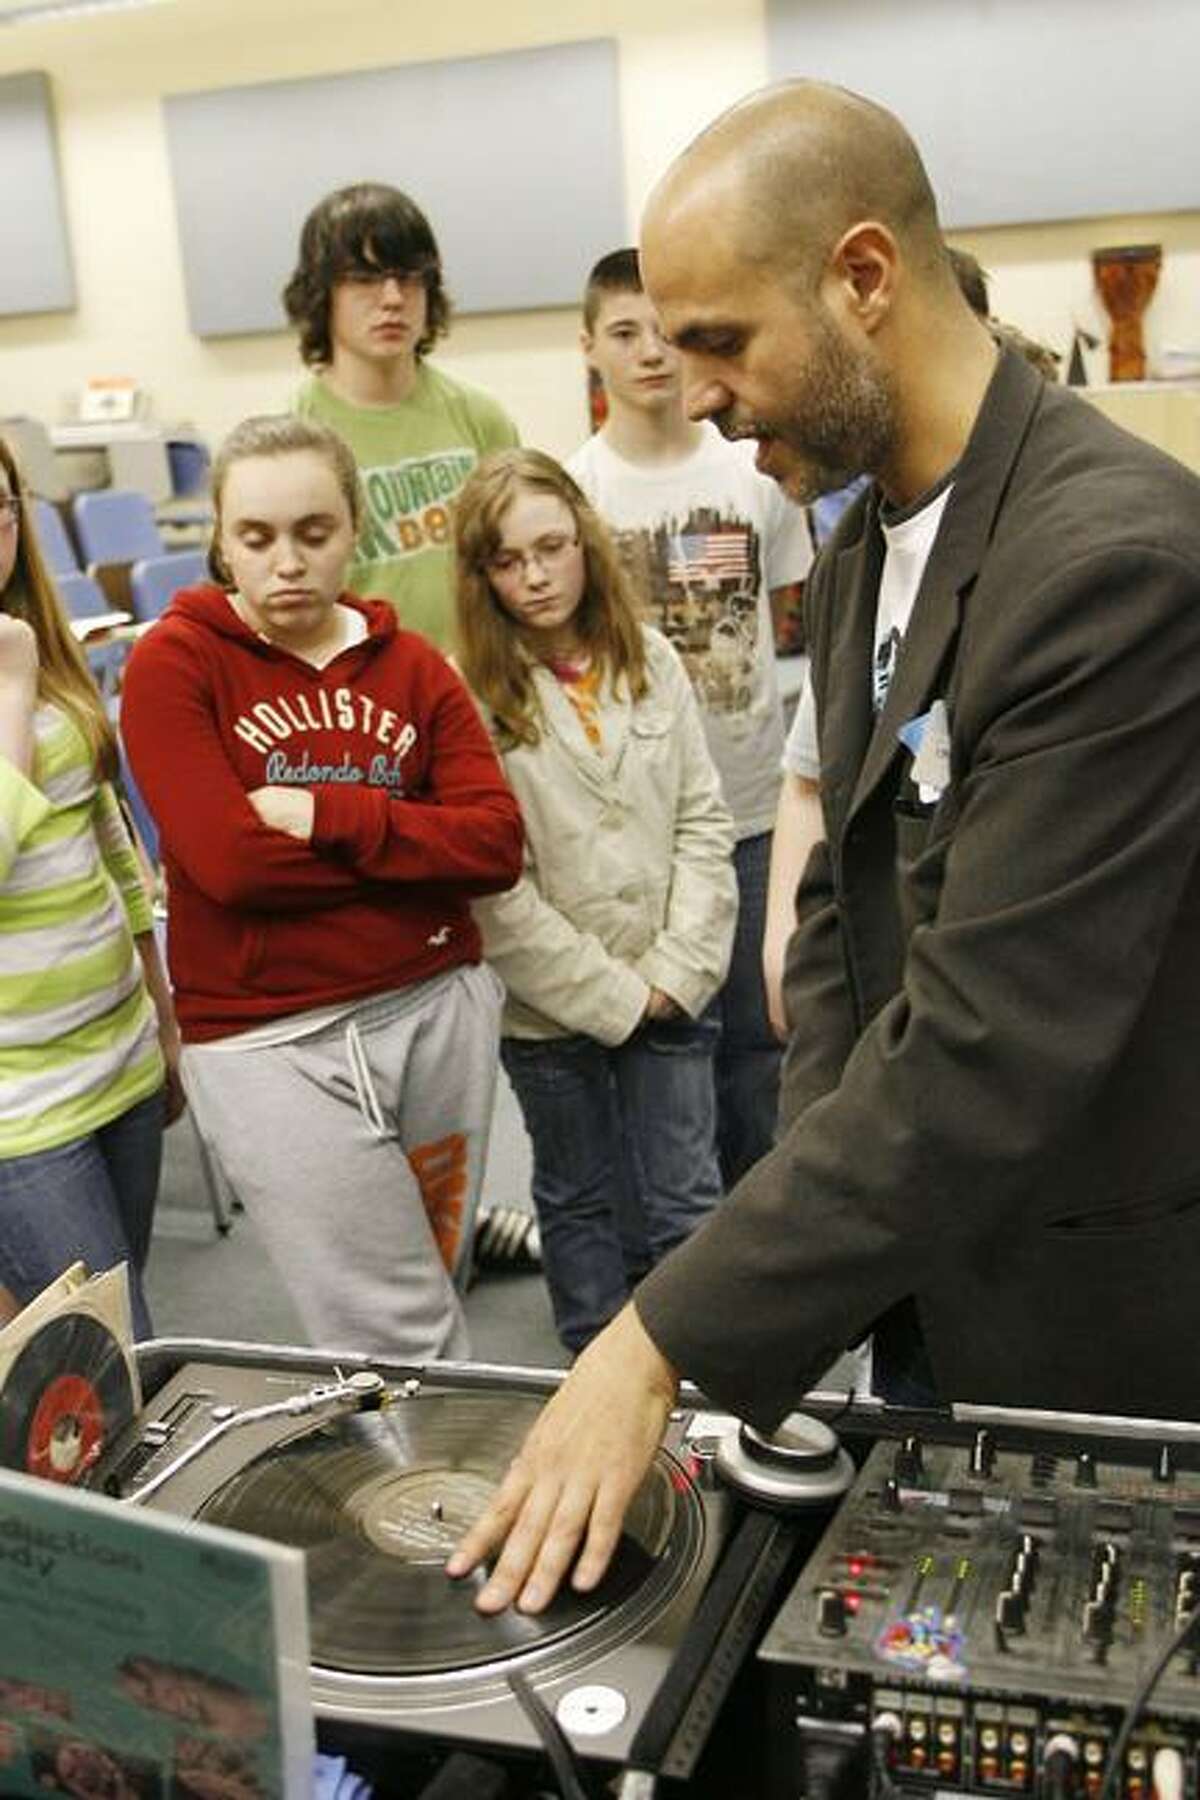 Photo by JOHN HAEGER Otto Shortell Middle School seventh-graders watch DJ Marc Tucci talk about his career and tools of his trade during a career fair held at the school on Tuesday, May 17, 2011.